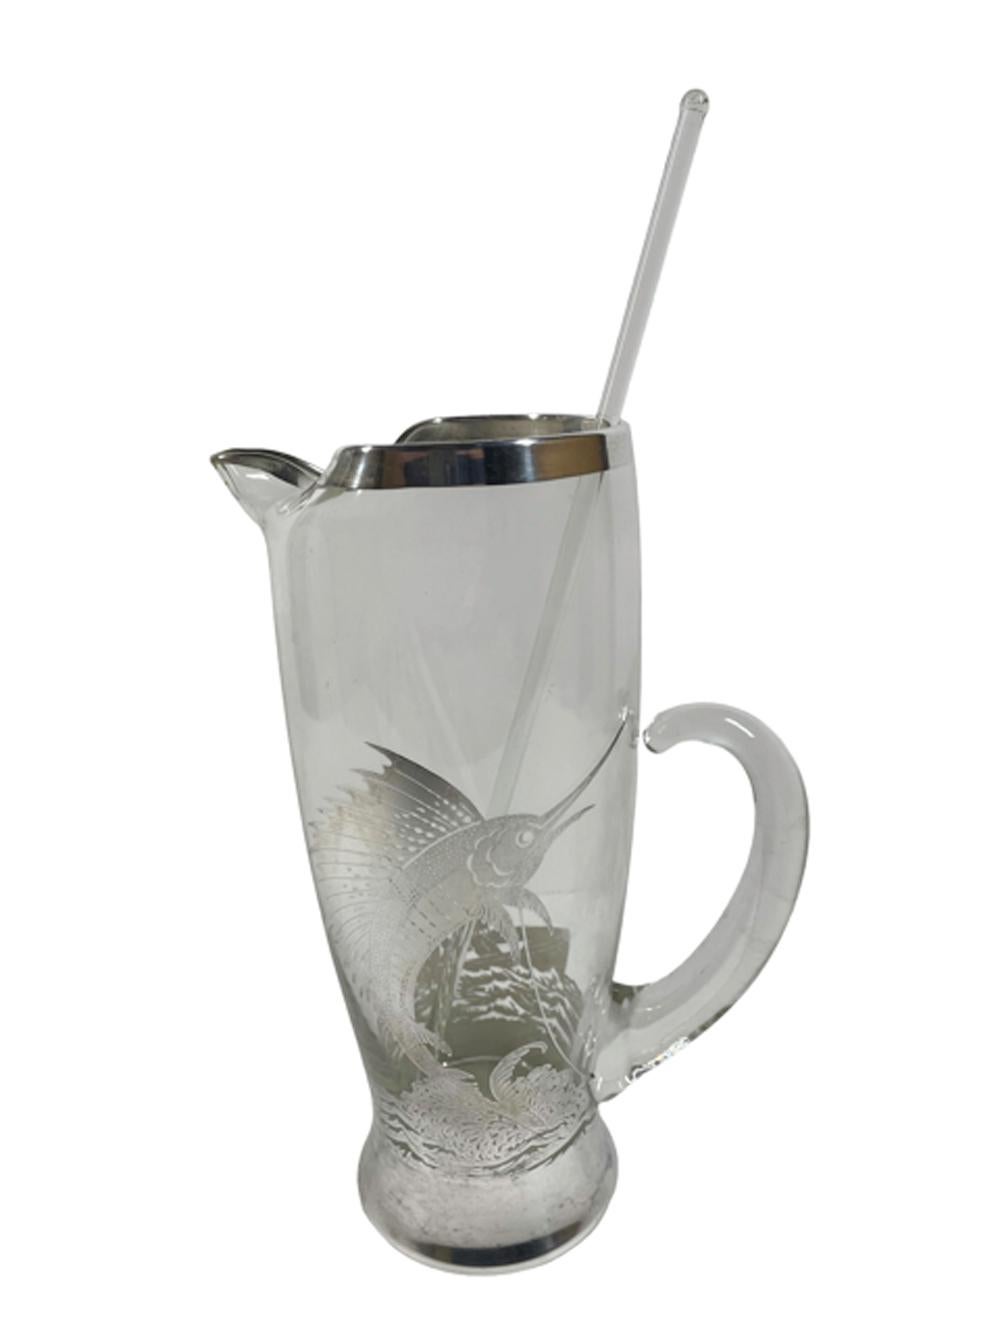 Art Deco silver overlay cocktail pitcher with glass stir rod and 8 tumblers. The pitcher and tumblers all decorated in sterling overlay with a leaping sailfish / marlin on the front and two men fishing from a dory on the back, all connected by a